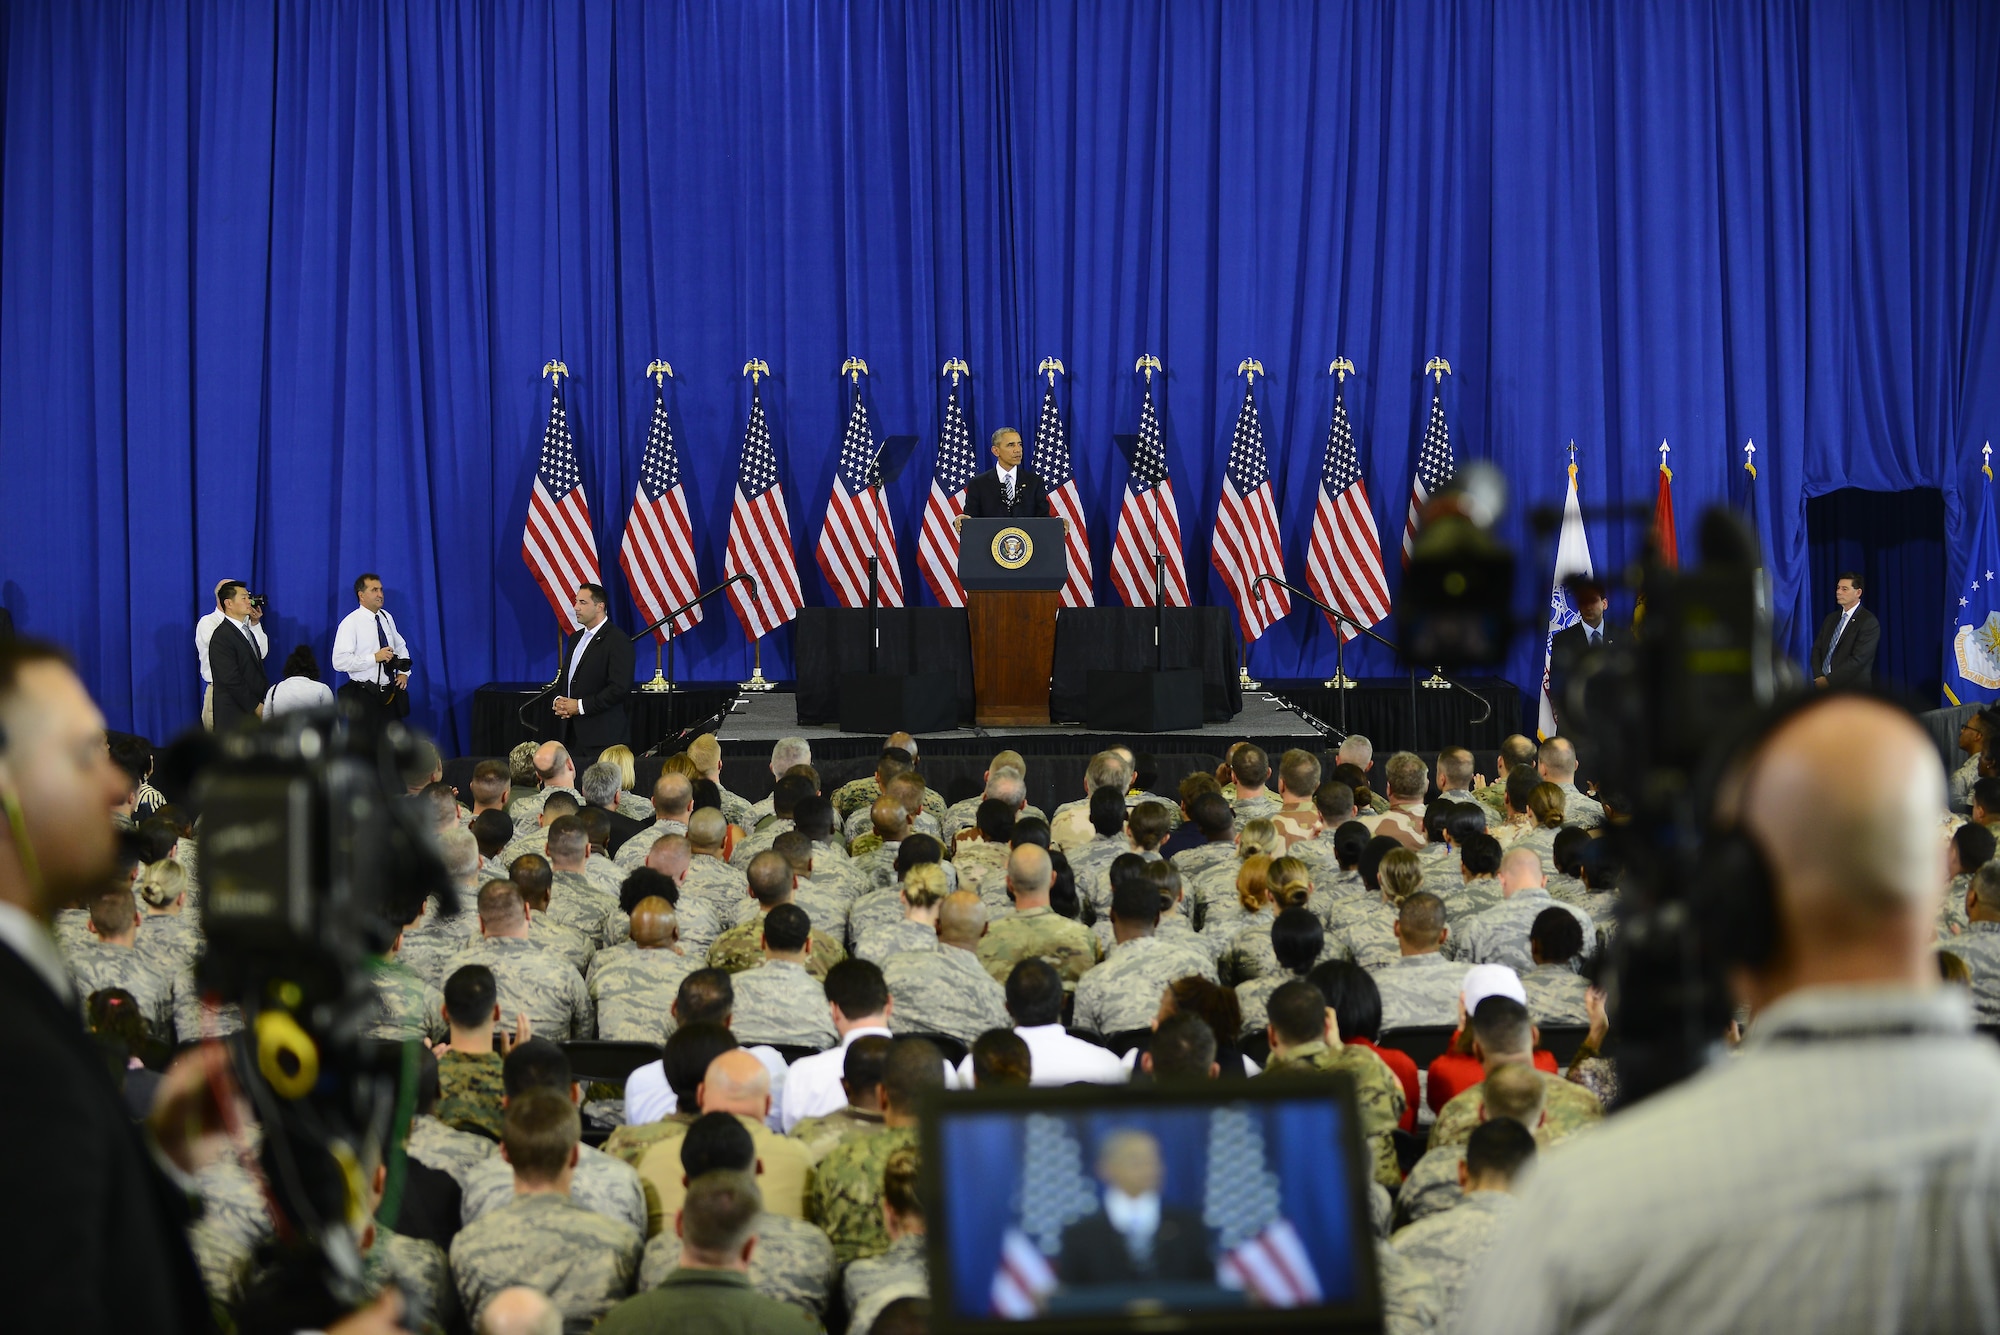 President Barack Obama addresses service members during a visit to MacDill Air Force Base, Fla. Dec. 6, 2016. The president thanked the men and women for their service and spoke on counter terrorism measures, national security and highlighted accomplishments of the U.S. military. (U.S. Air Force photo by Staff Sgt. Melanie Hutto)